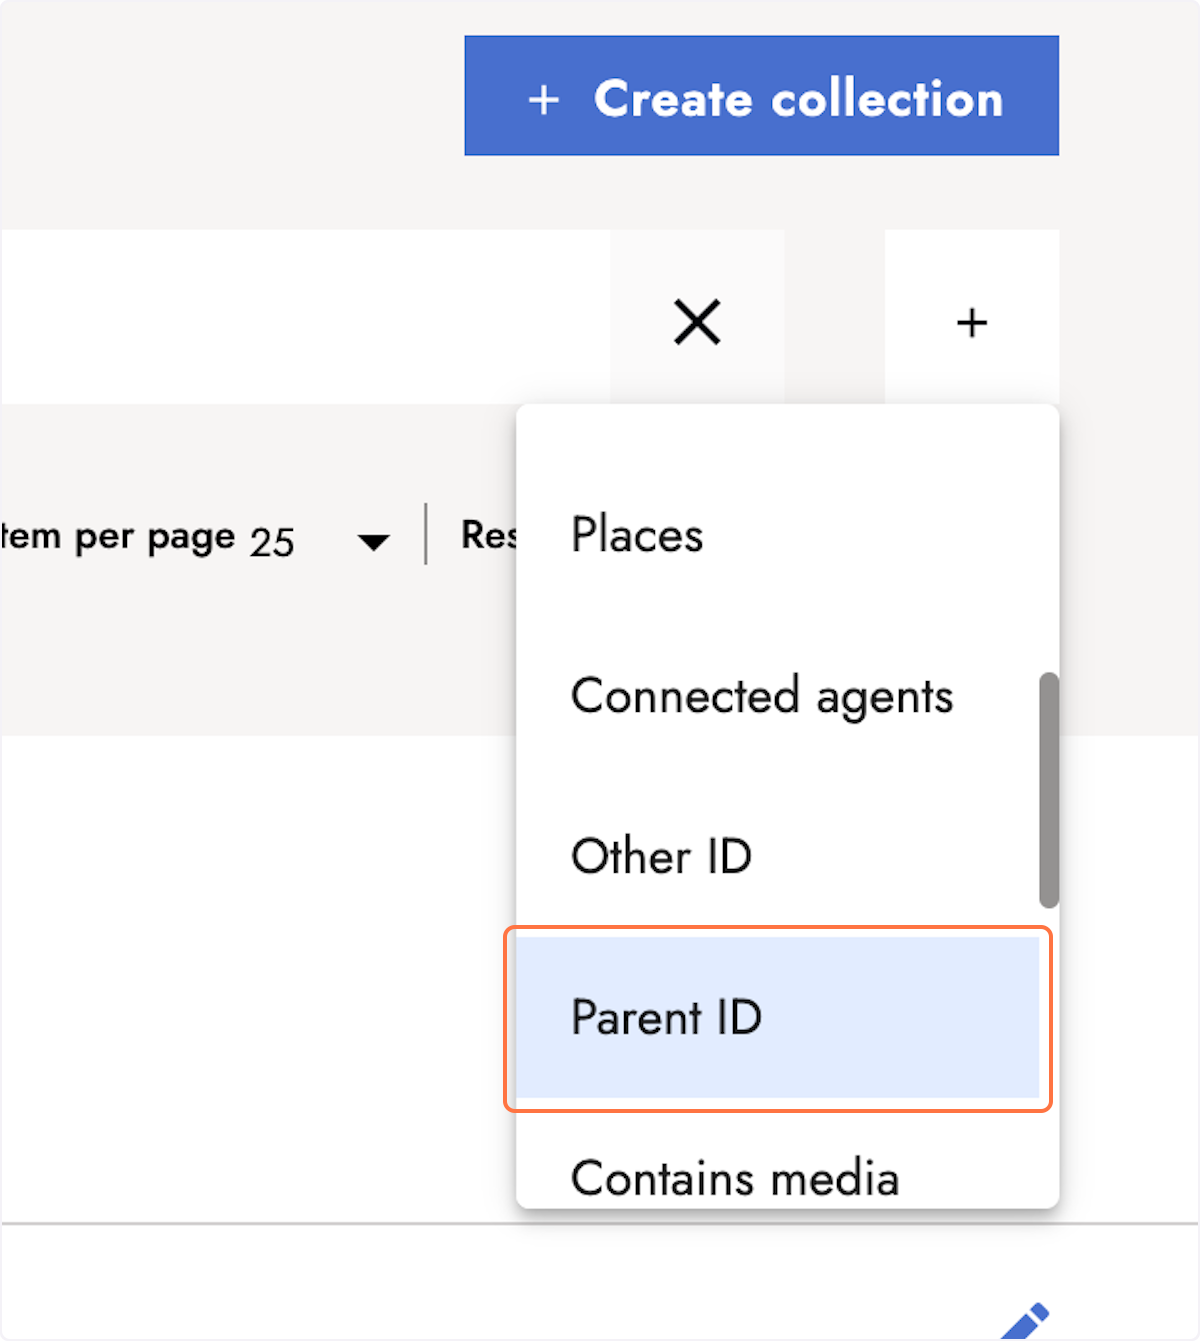 Select the Parent ID filter